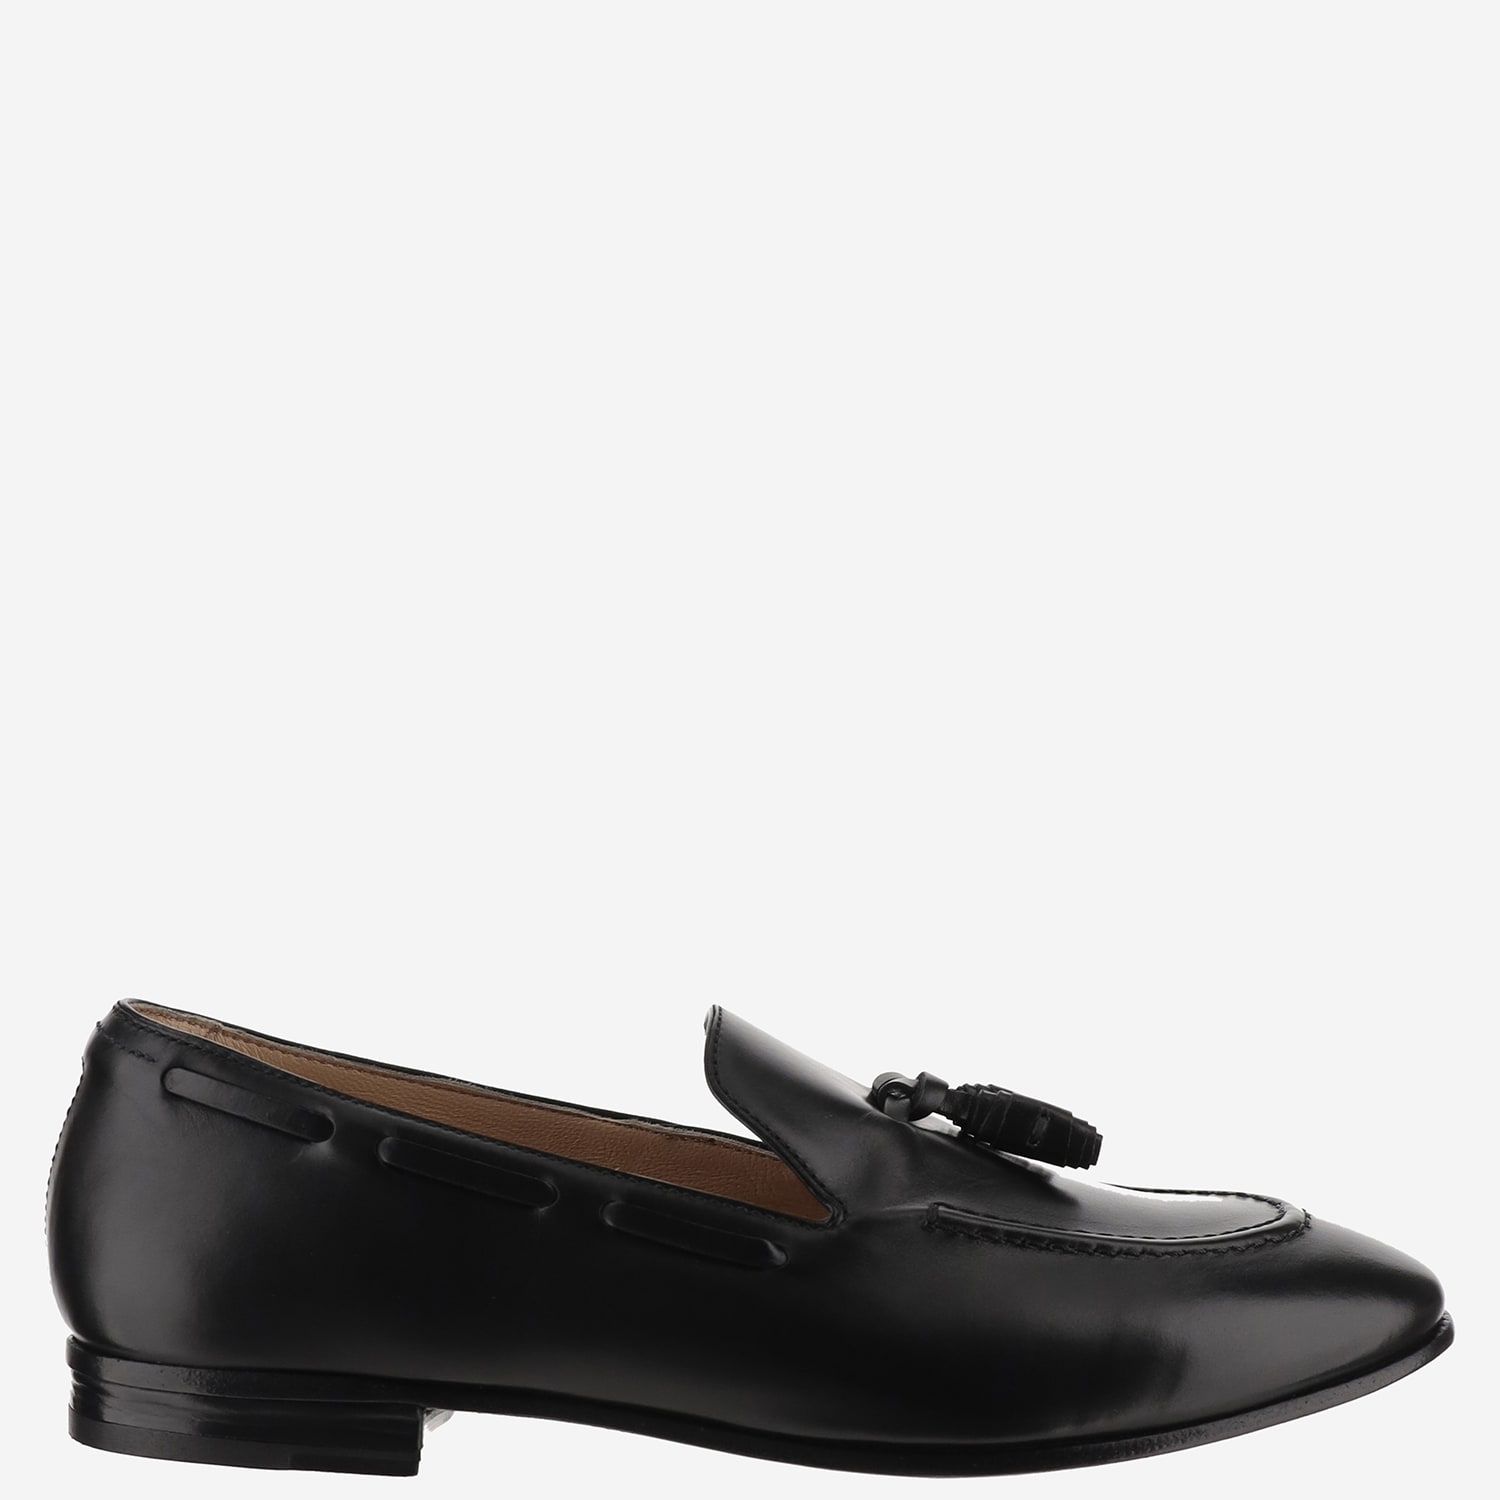 FRANCESCO RUSSO LEATHER LOAFERS